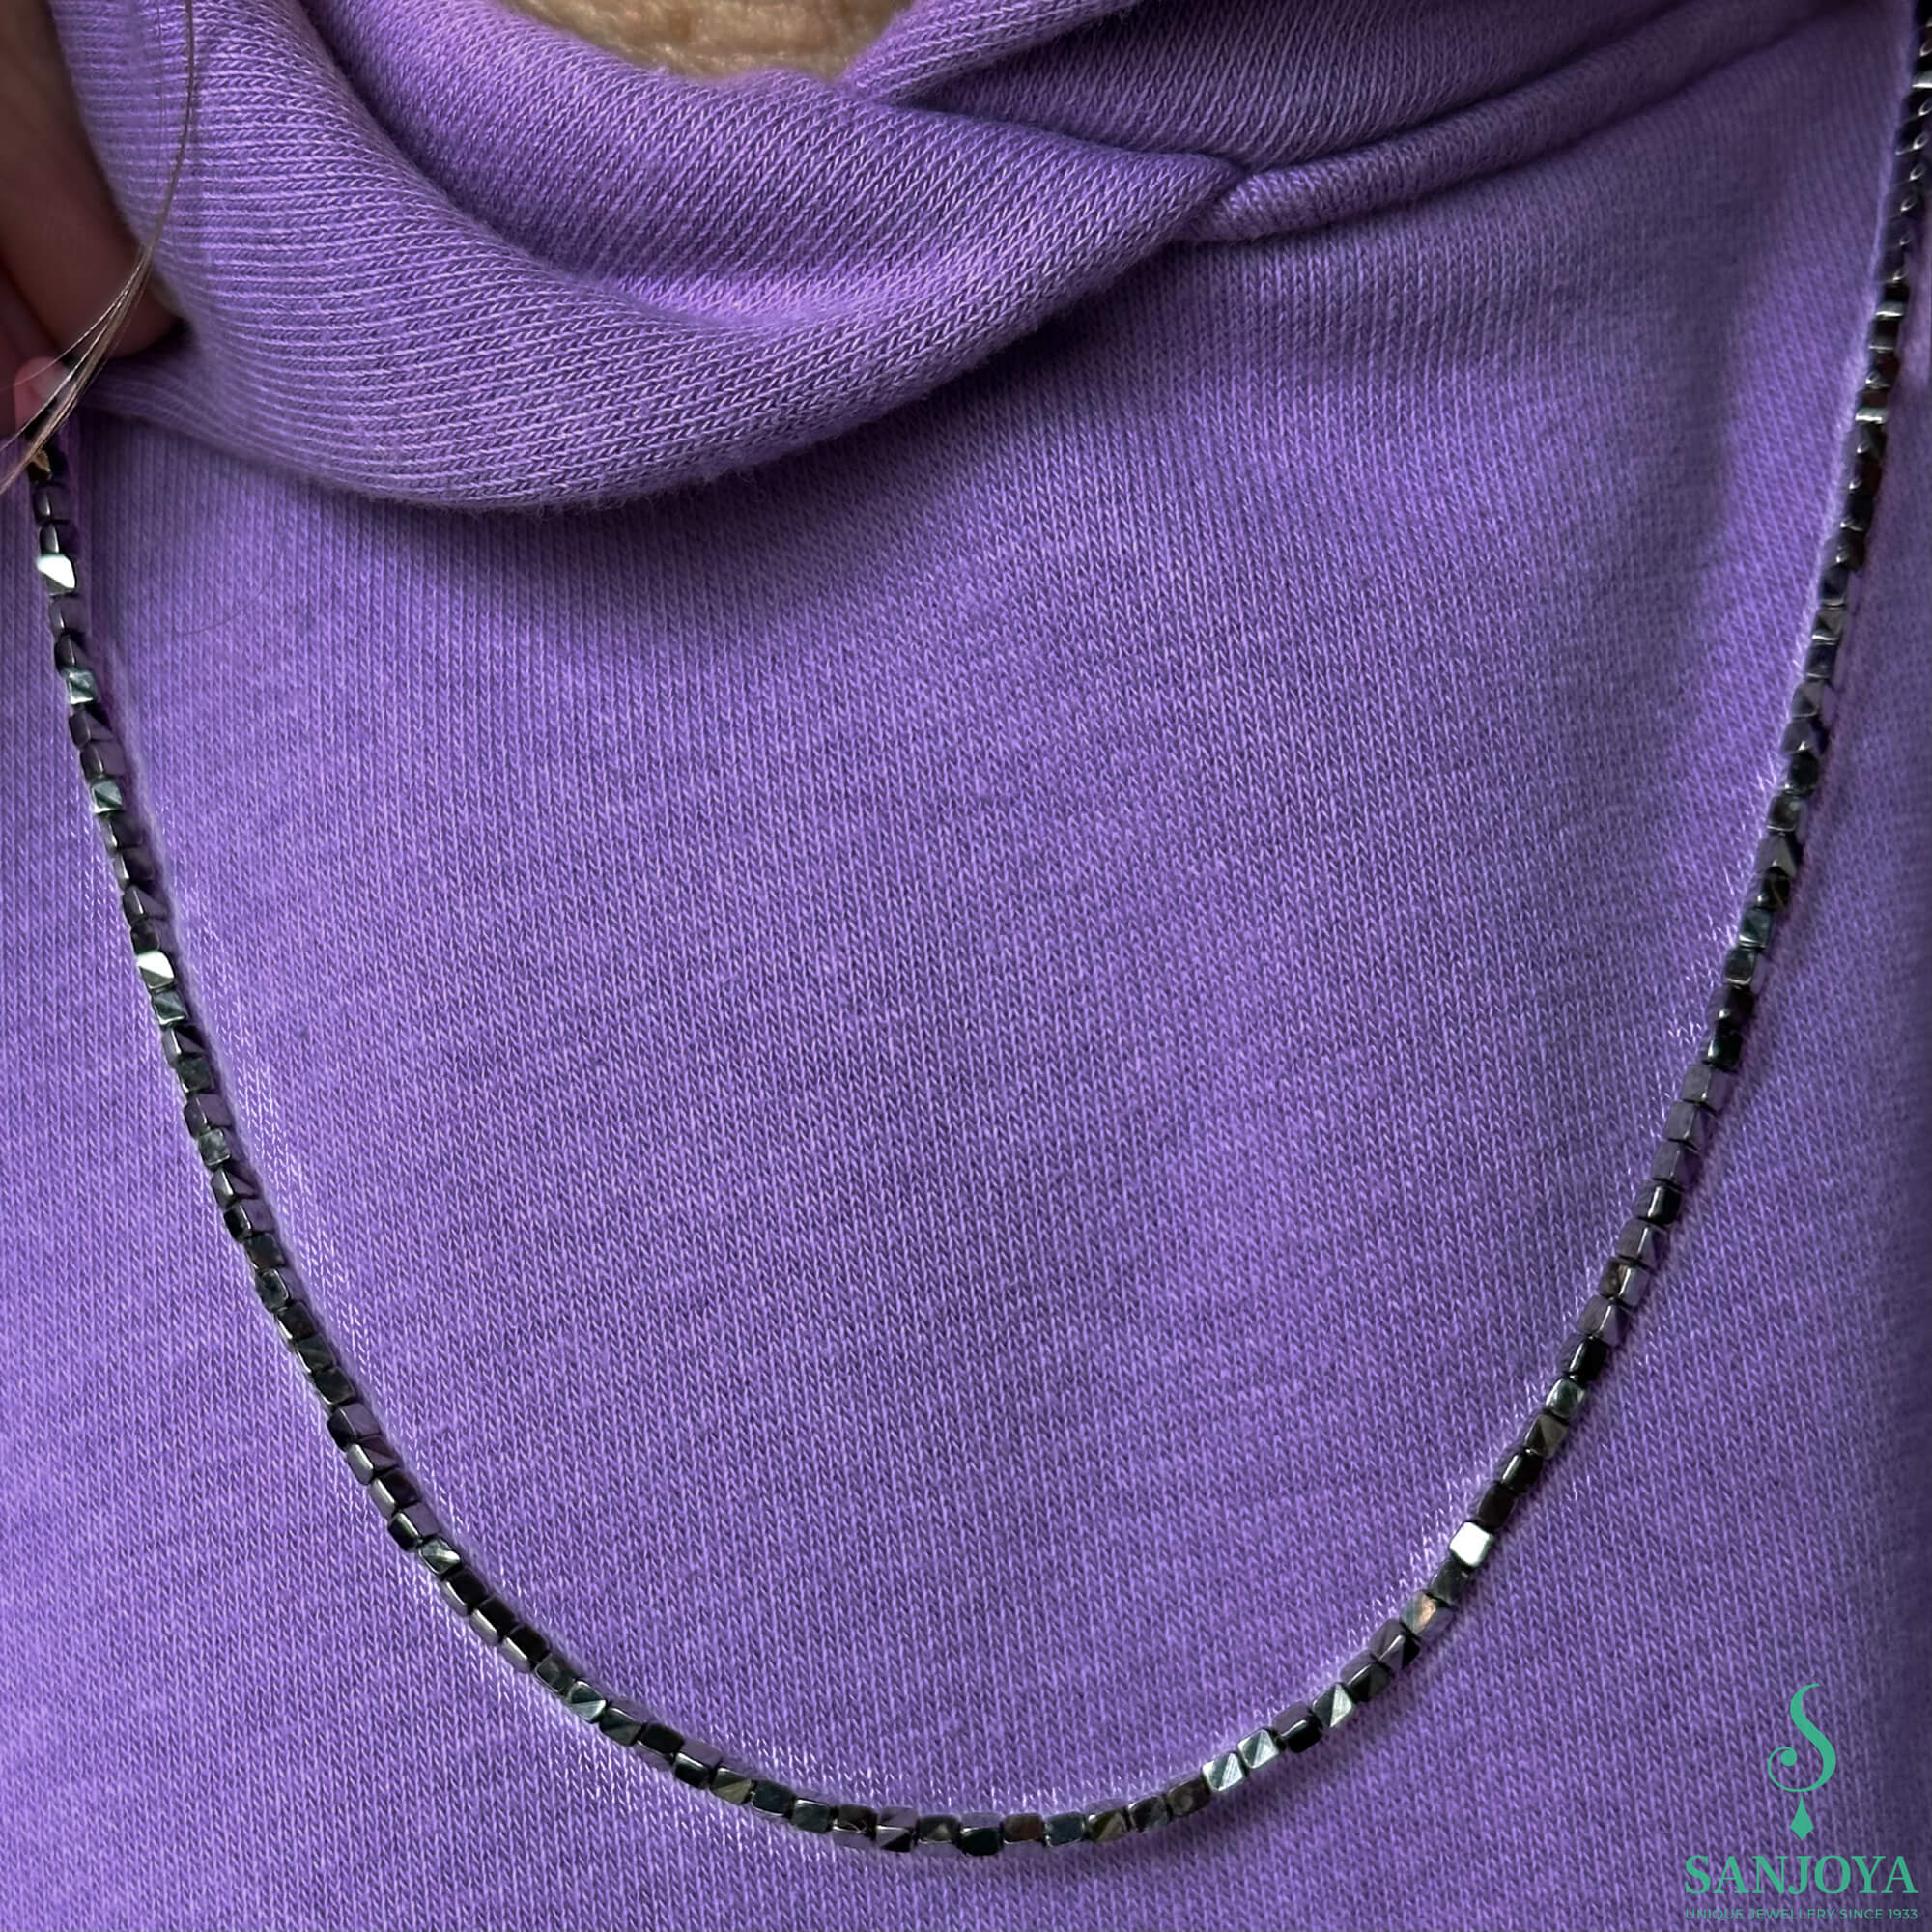 Refined block necklace made of hematite